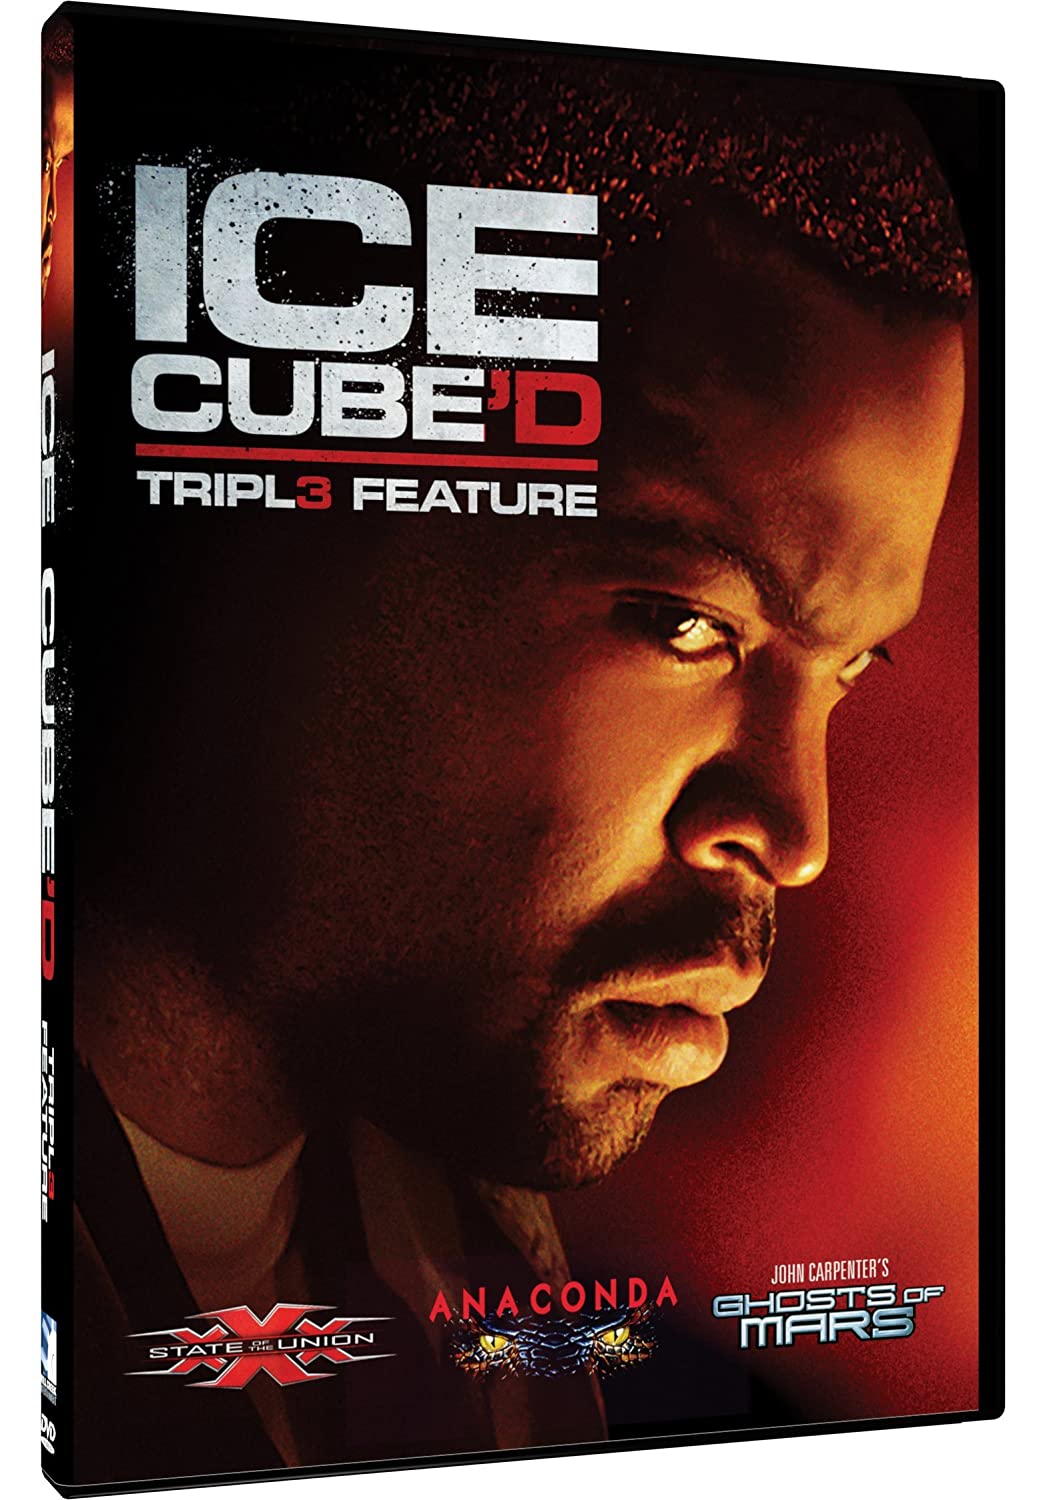 MILL CREEK ENTERTAINMENT Ice Cube'd Triple Feature DVD